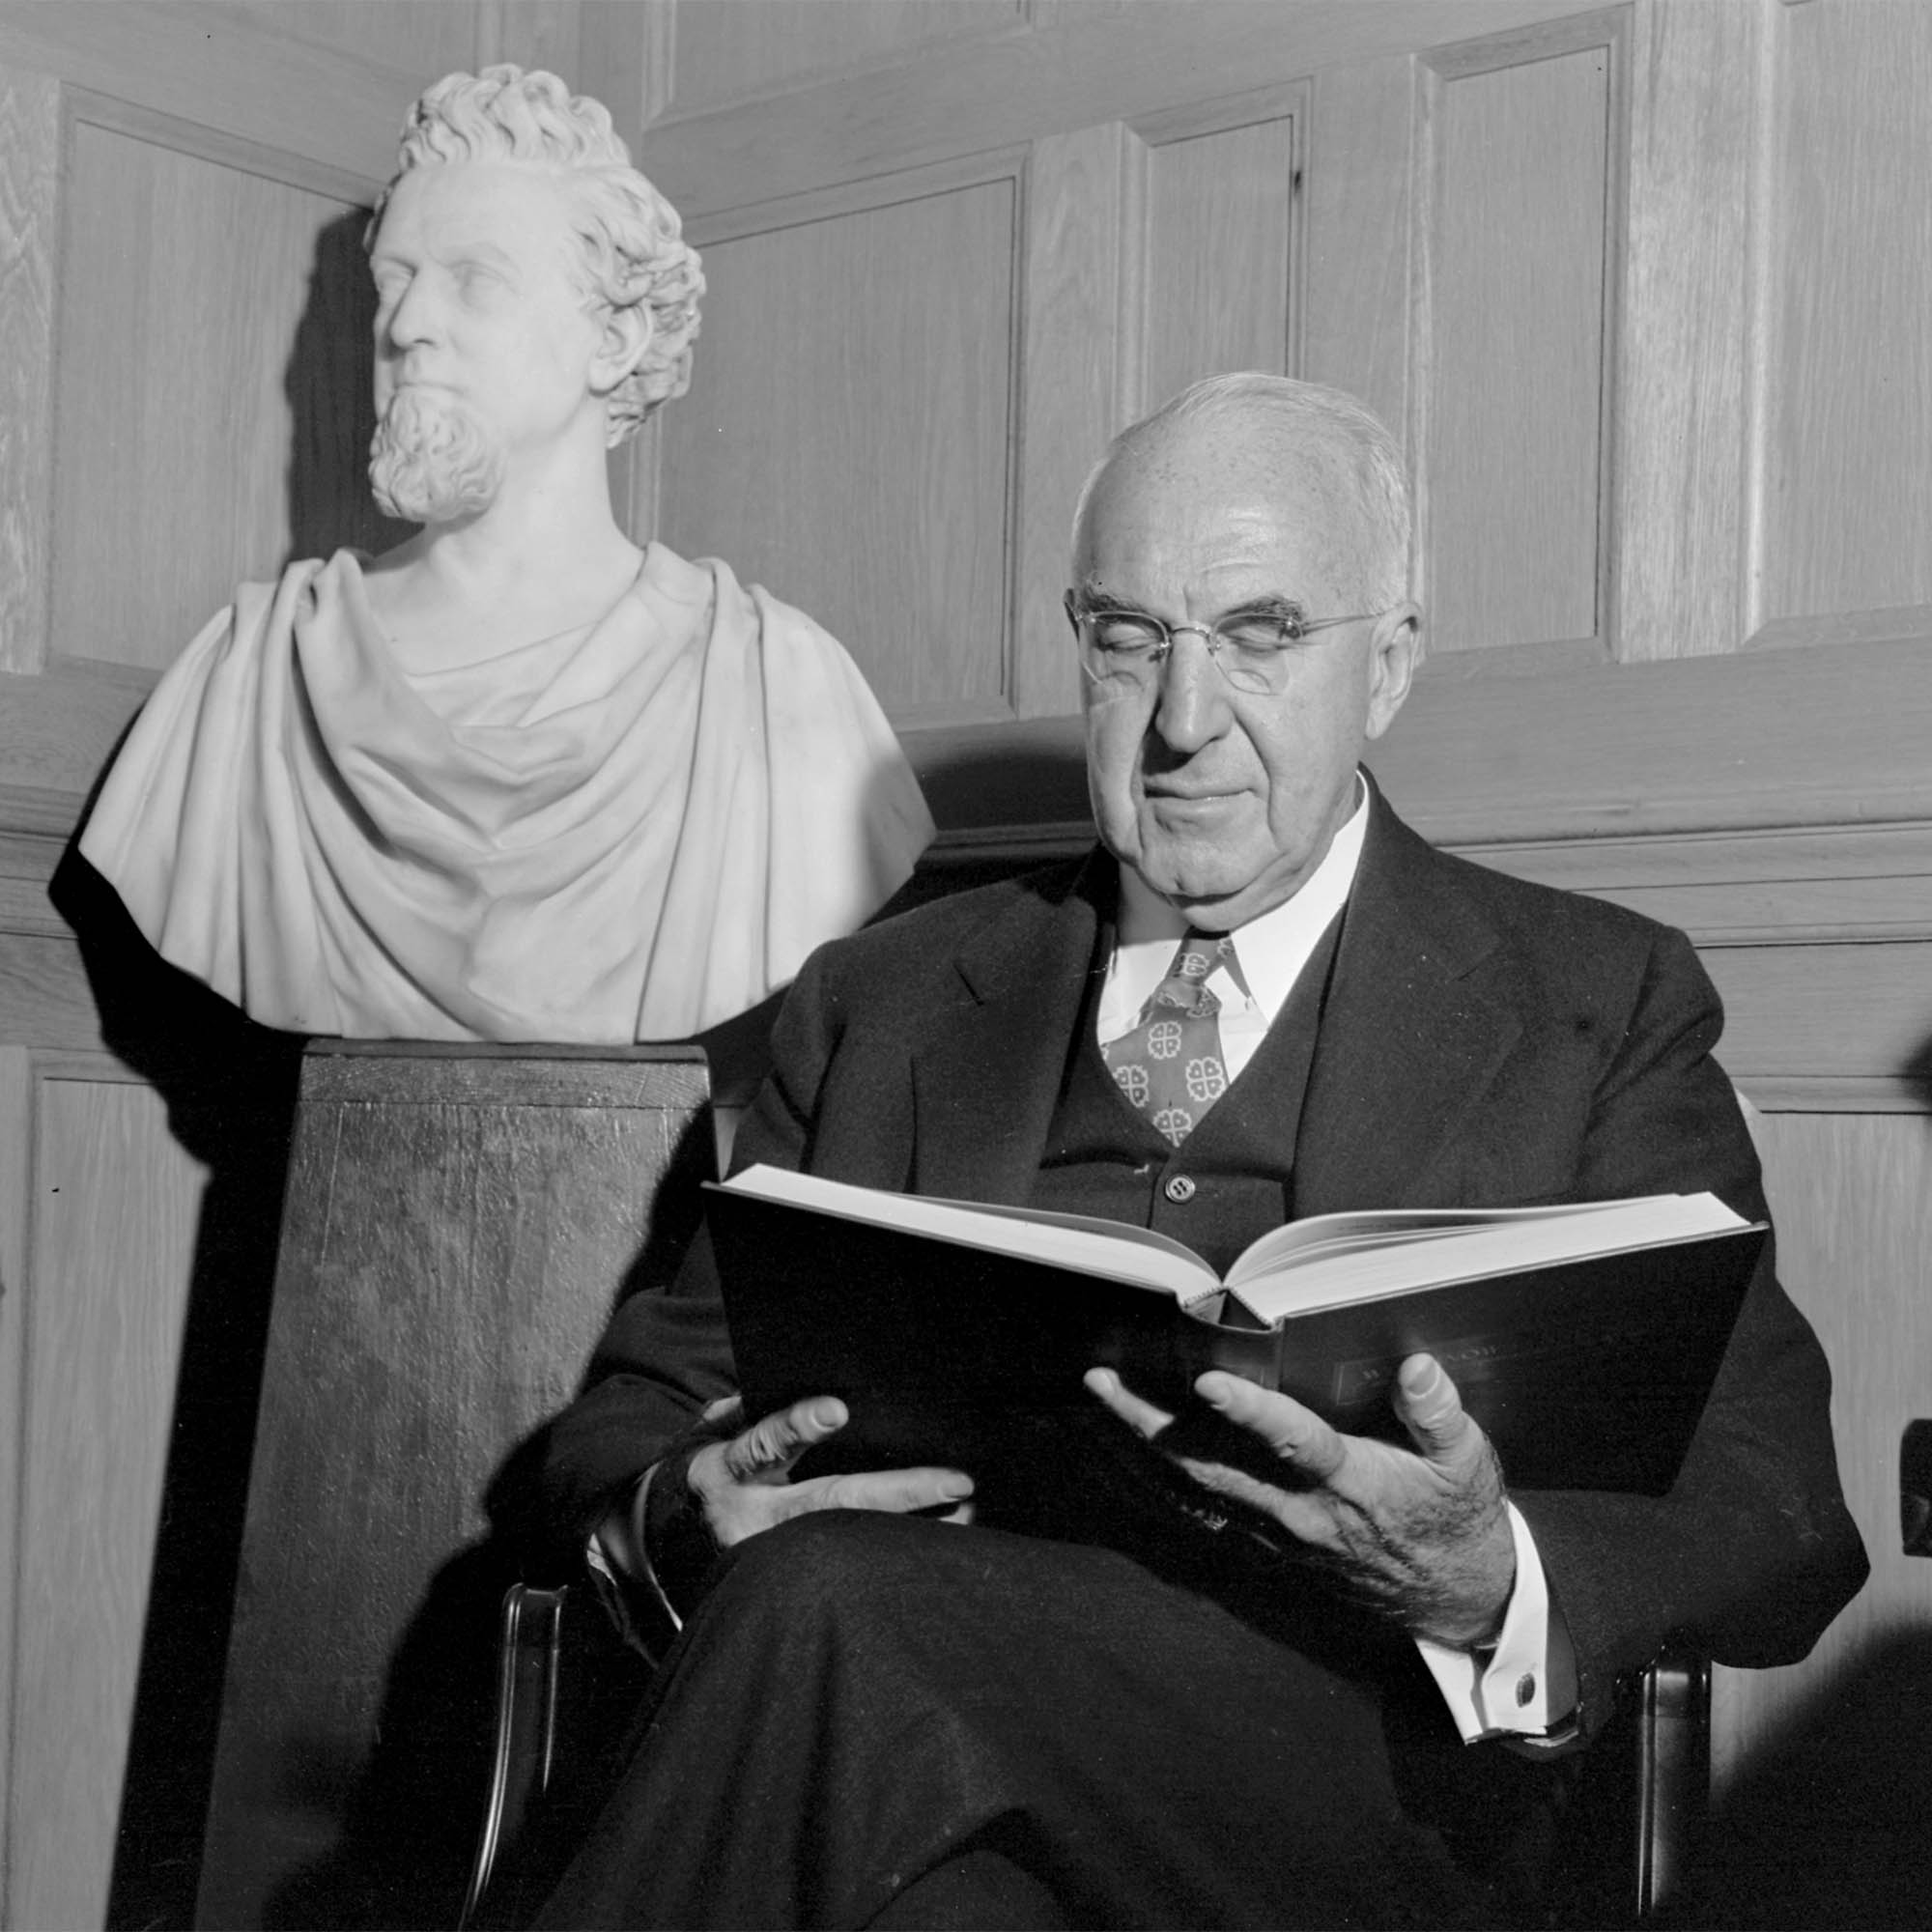 Photo: A man in a suit reading a book sits beside a greek bust of a presumed philosopher